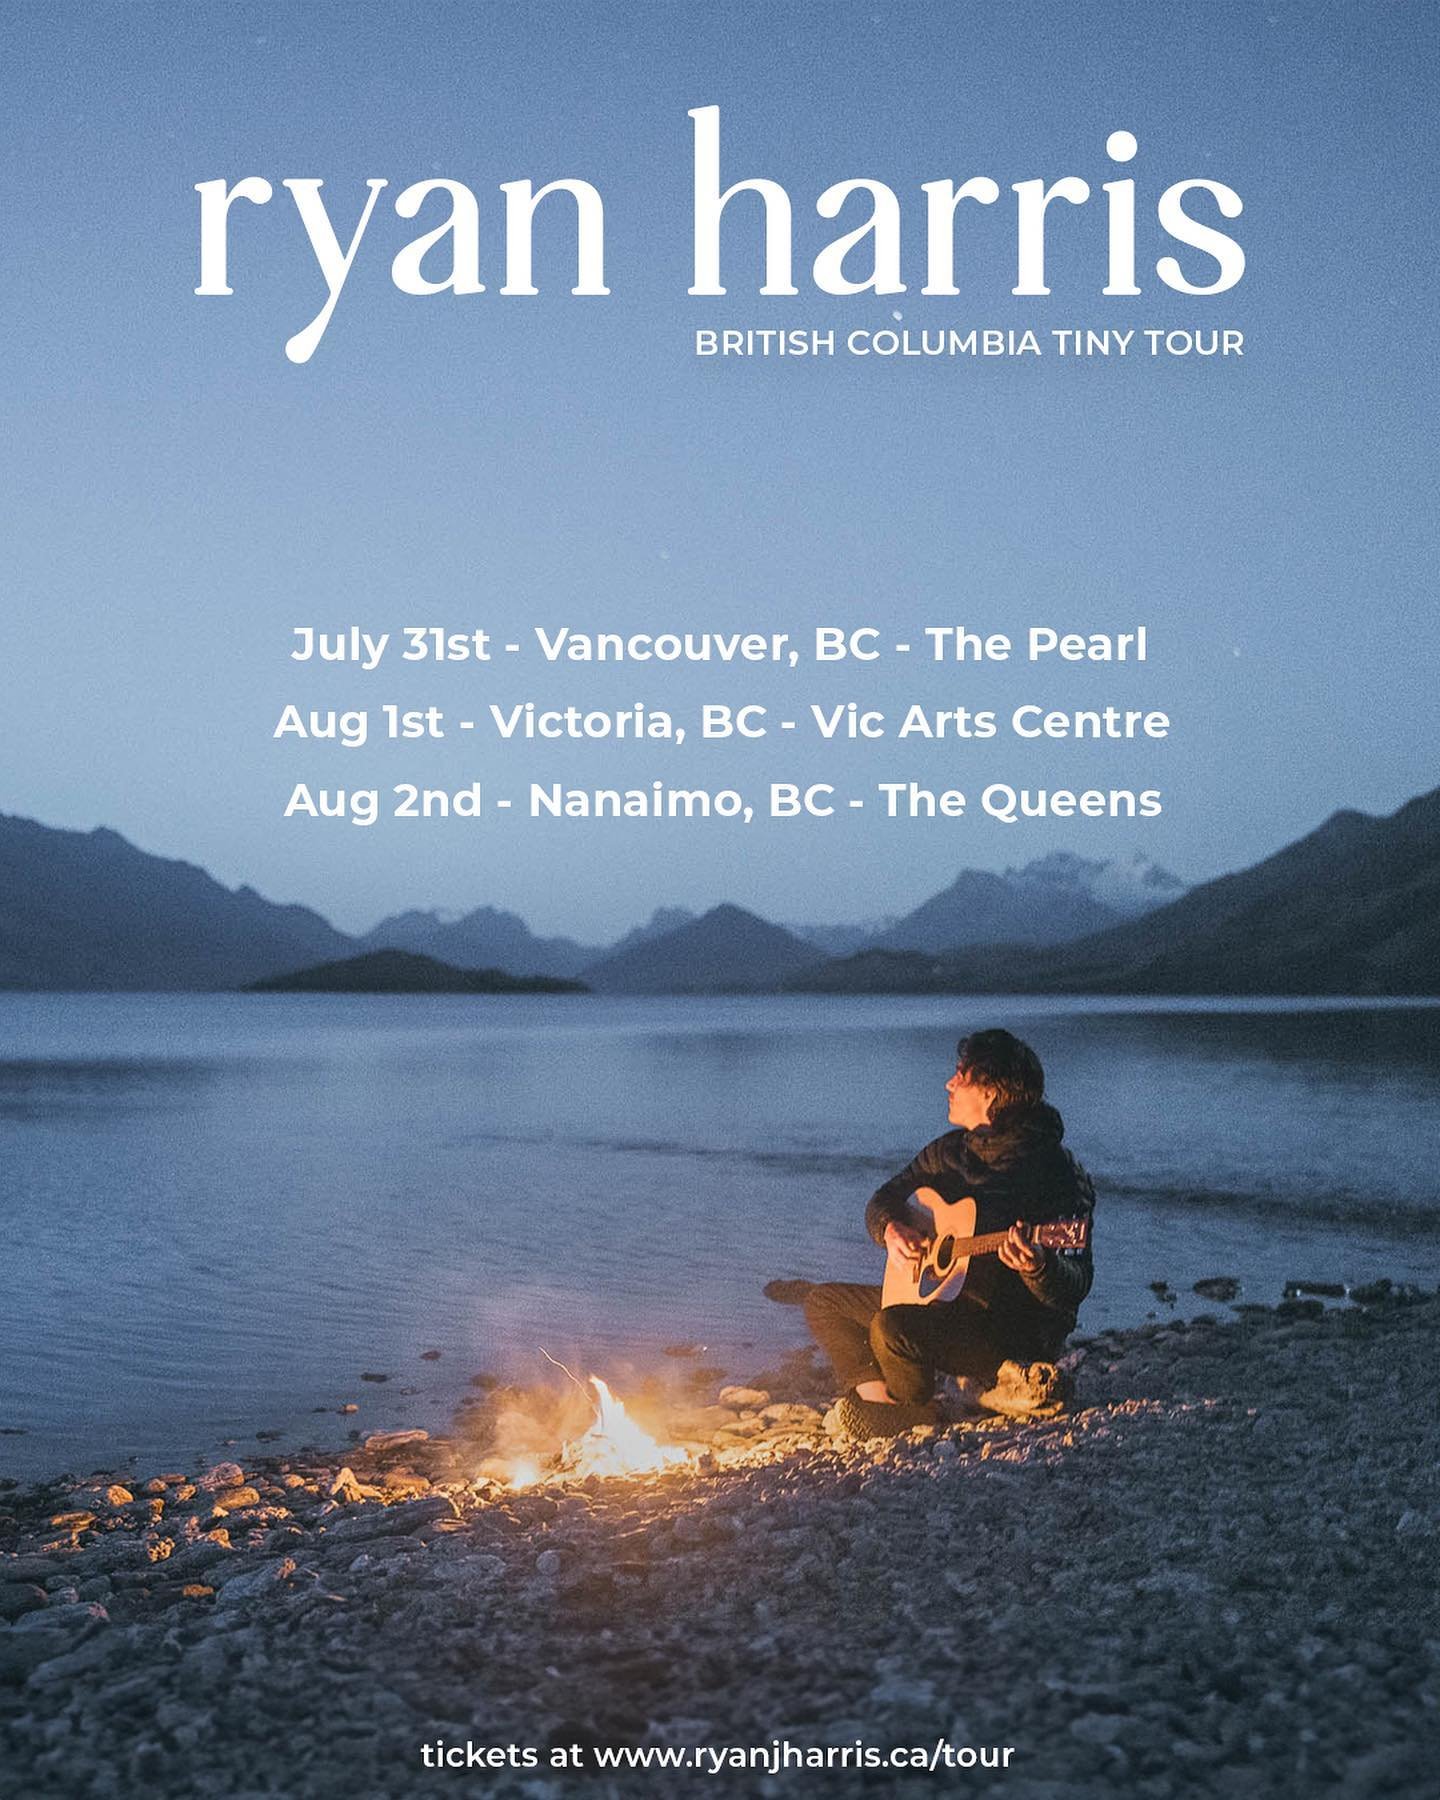 Vancouver, Victoria, Nanaimo!! Ticket GIVEAWAY below - tickets live this Wednesday - can&rsquo;t wait! 

Tickets live Wednesday 8AM PST - I am giving away 3 tickets to each of the shows - Just tag TWO friends you want to go with below and write which